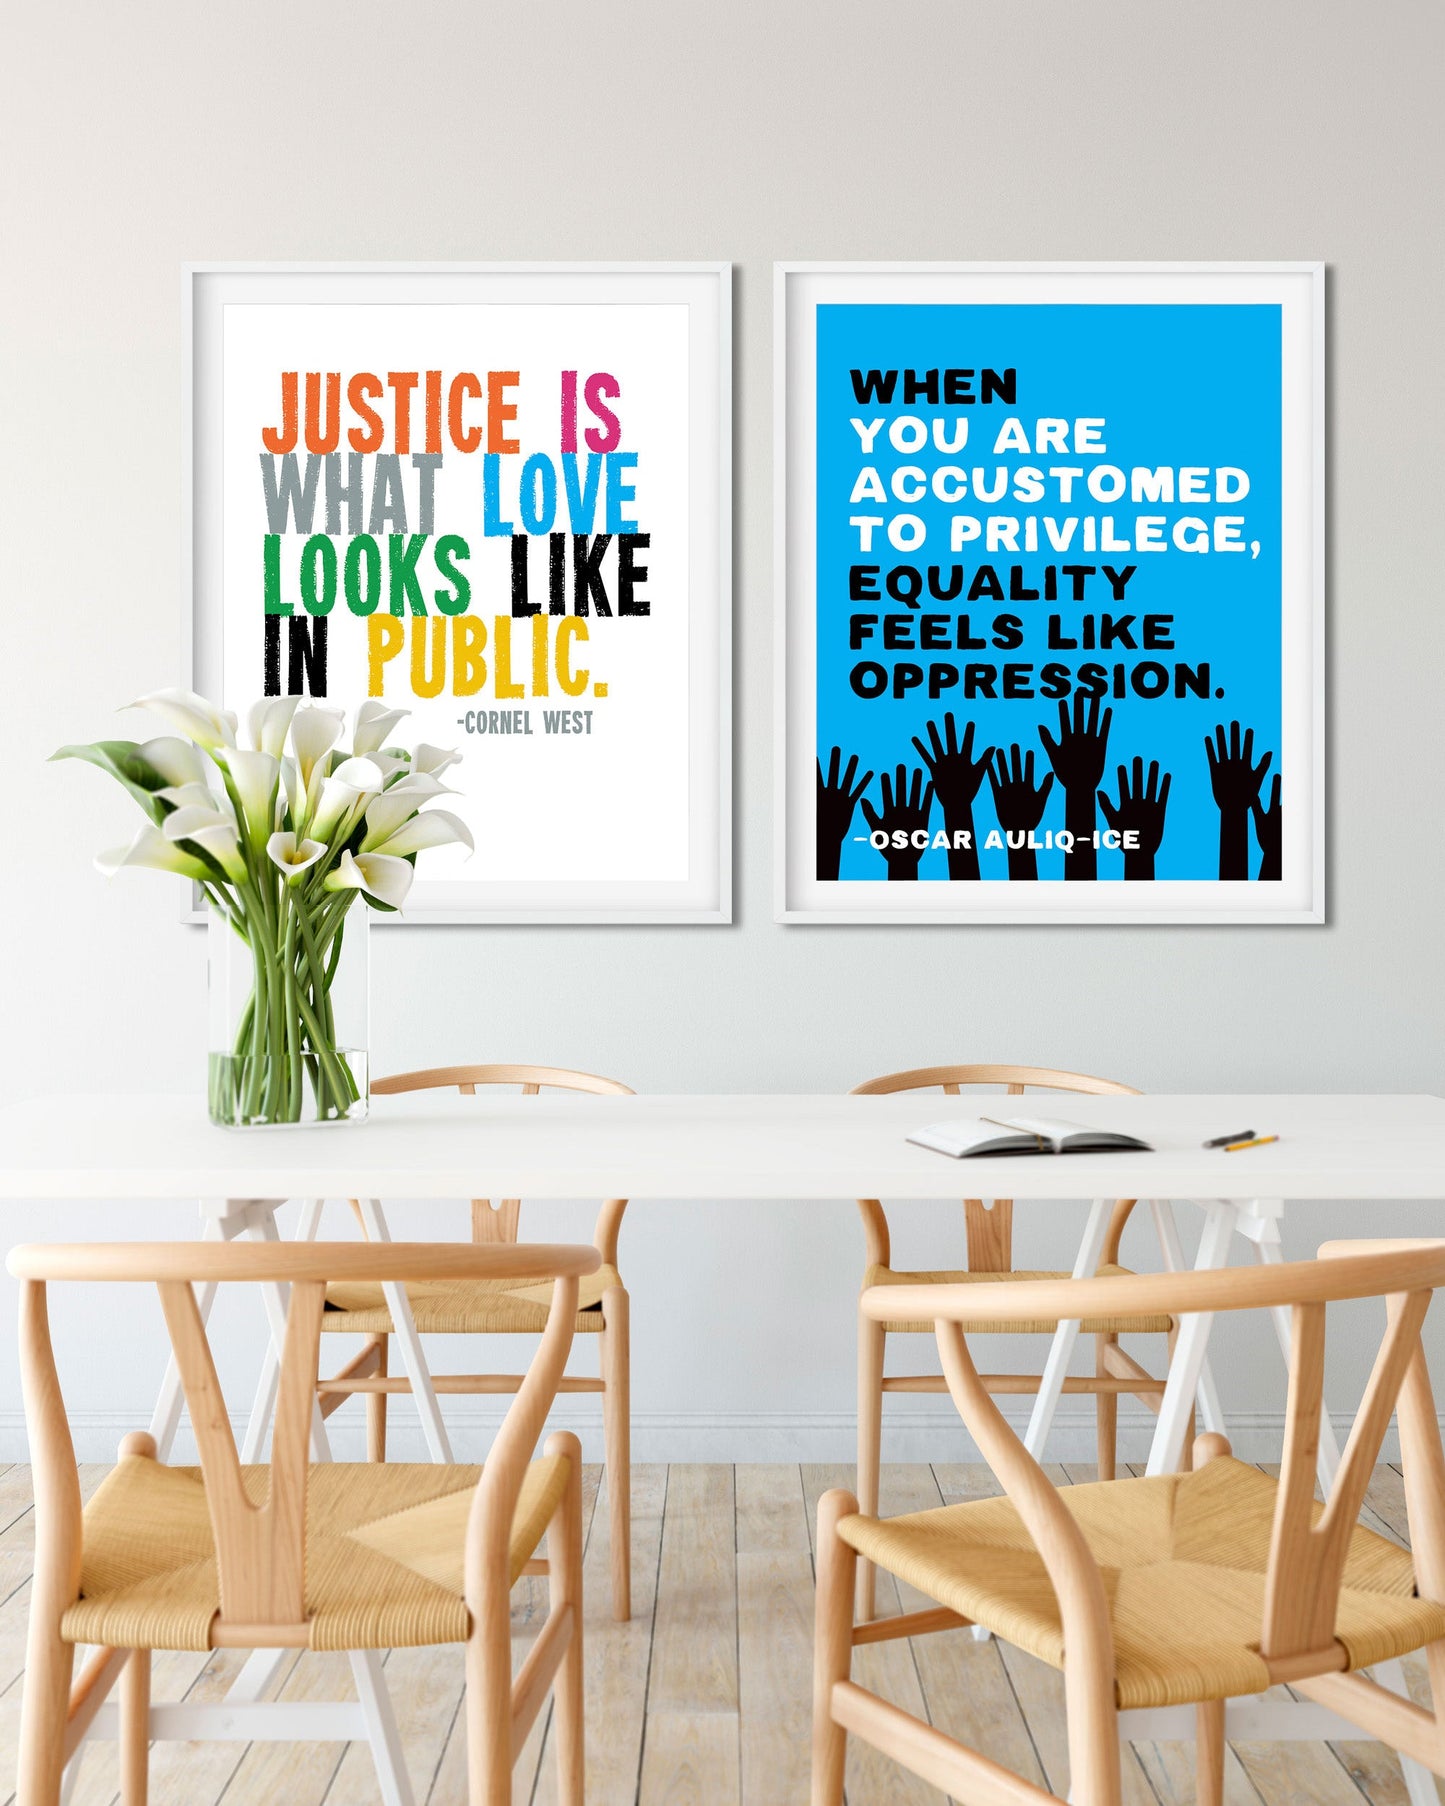 Tow Social Justice Posters hanging side by side in modern dining room - Transit Design